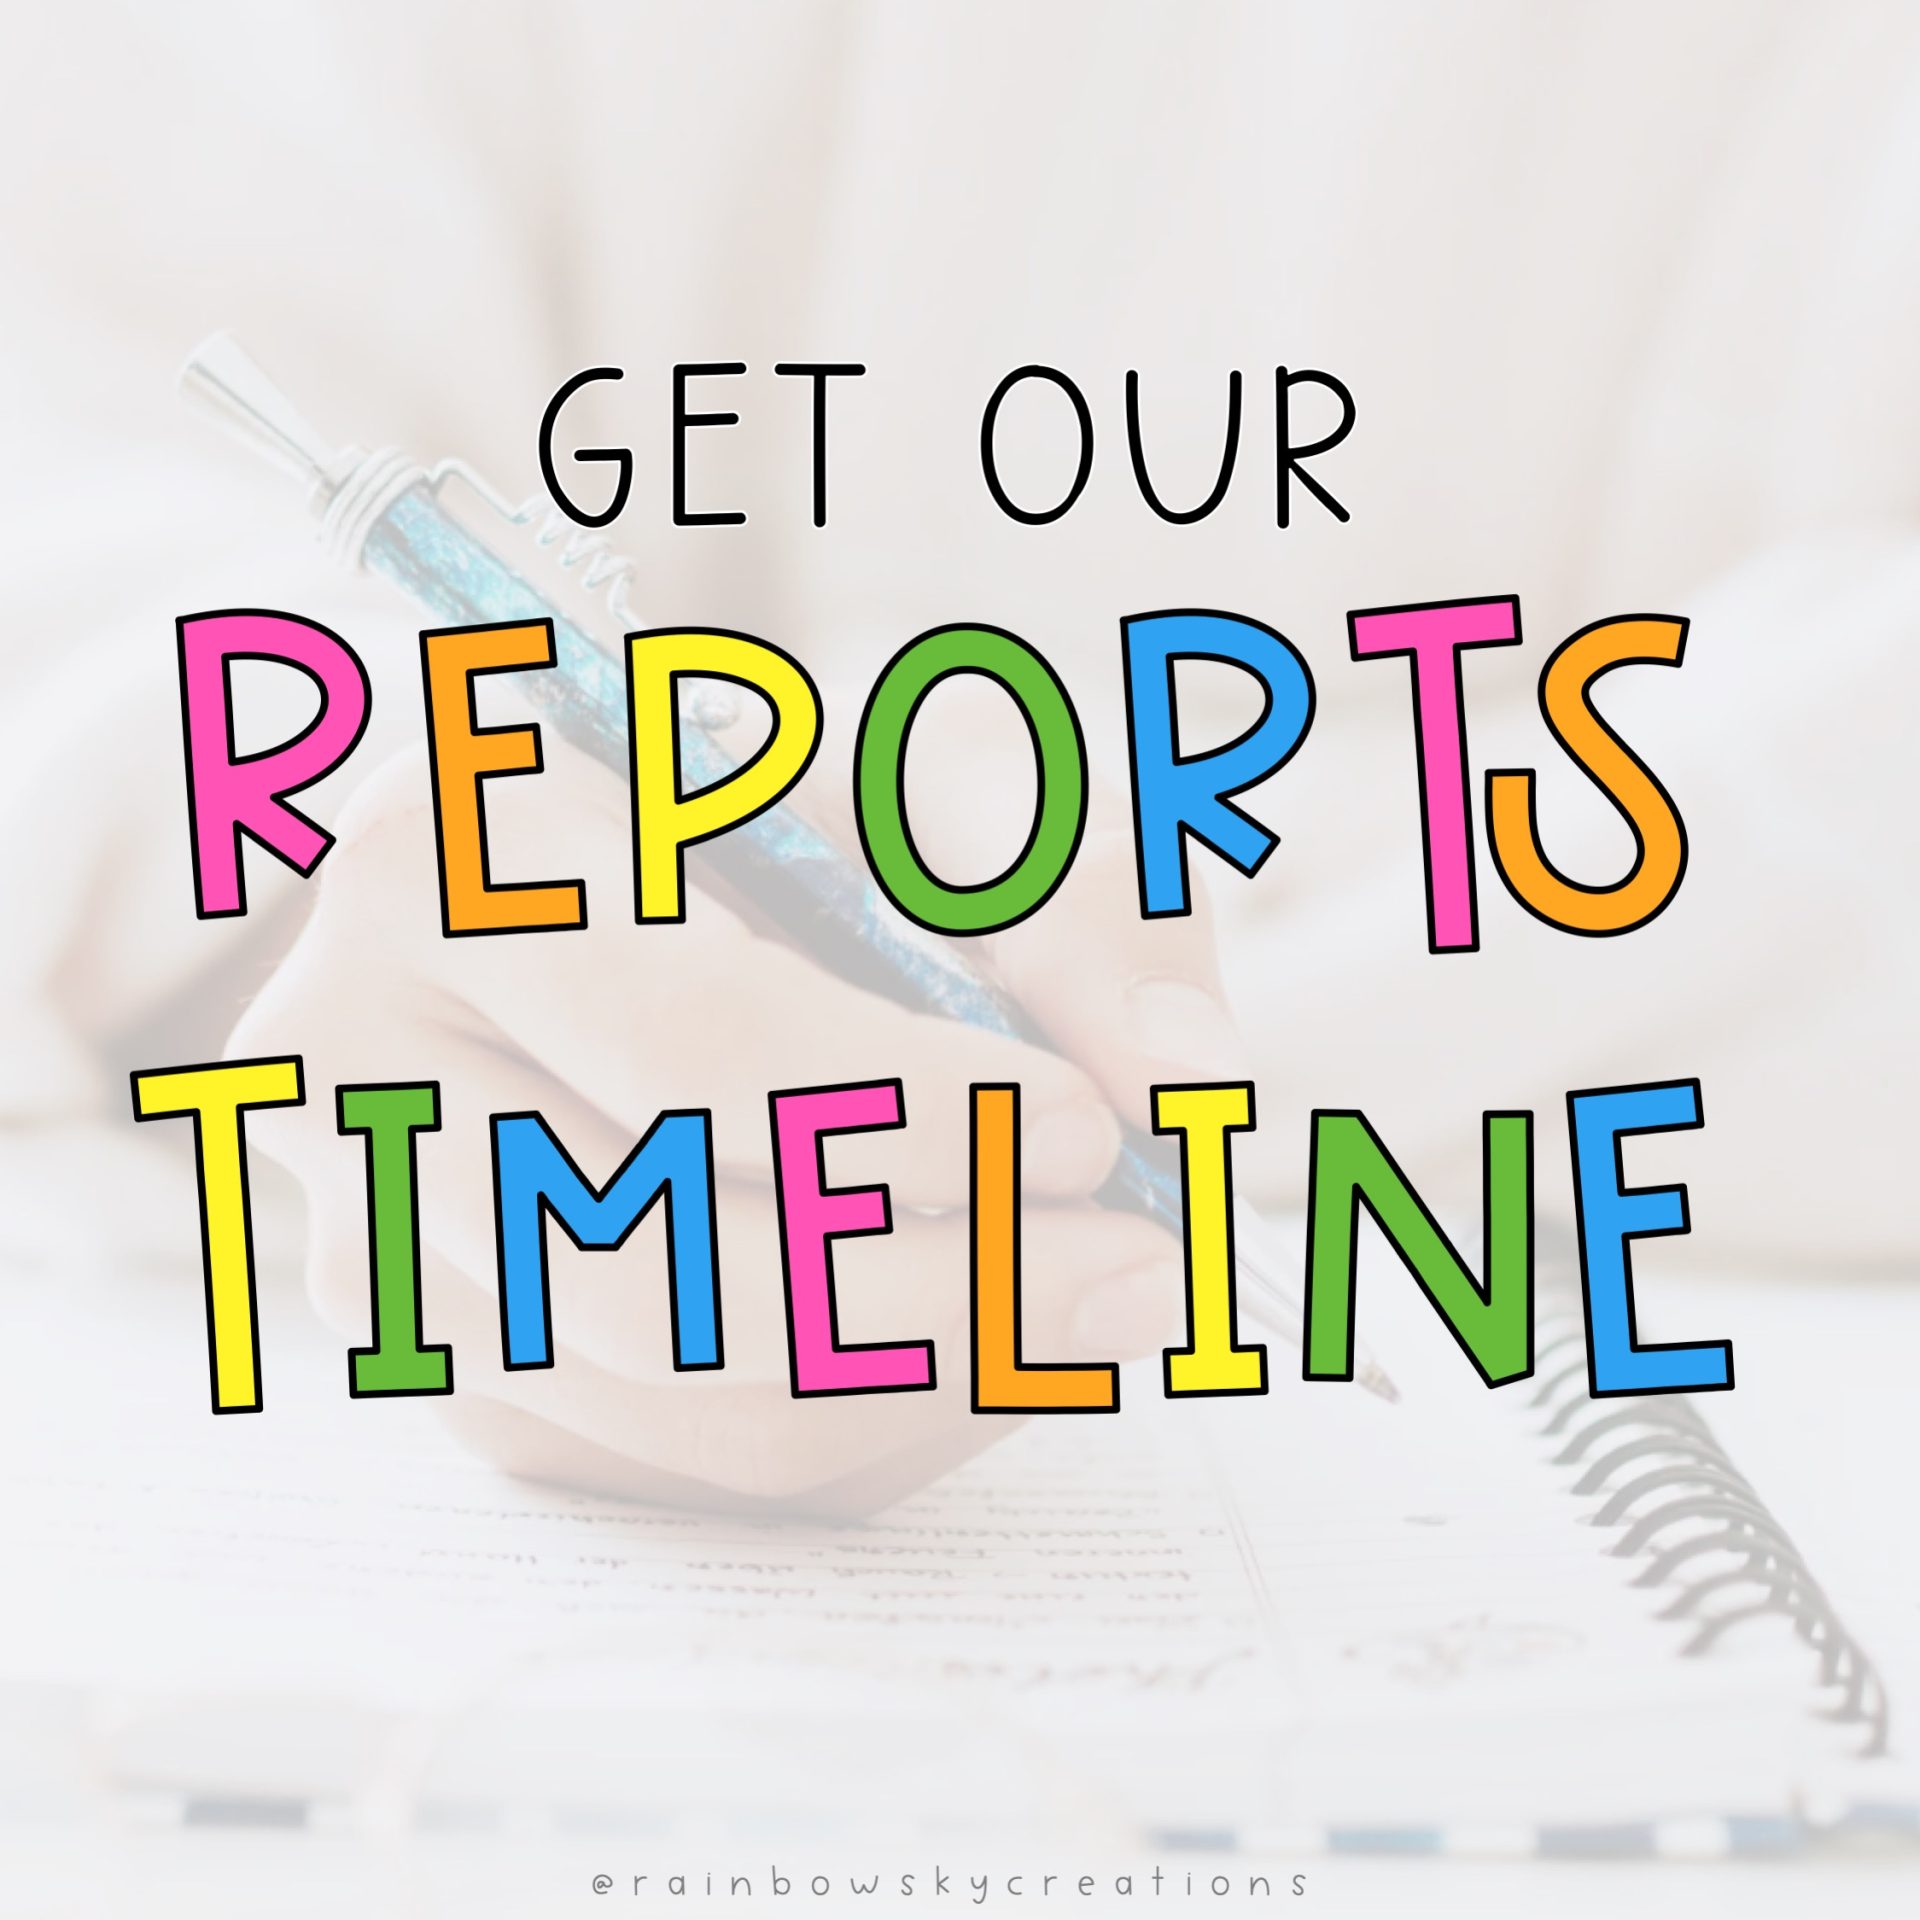 Report writing timeline